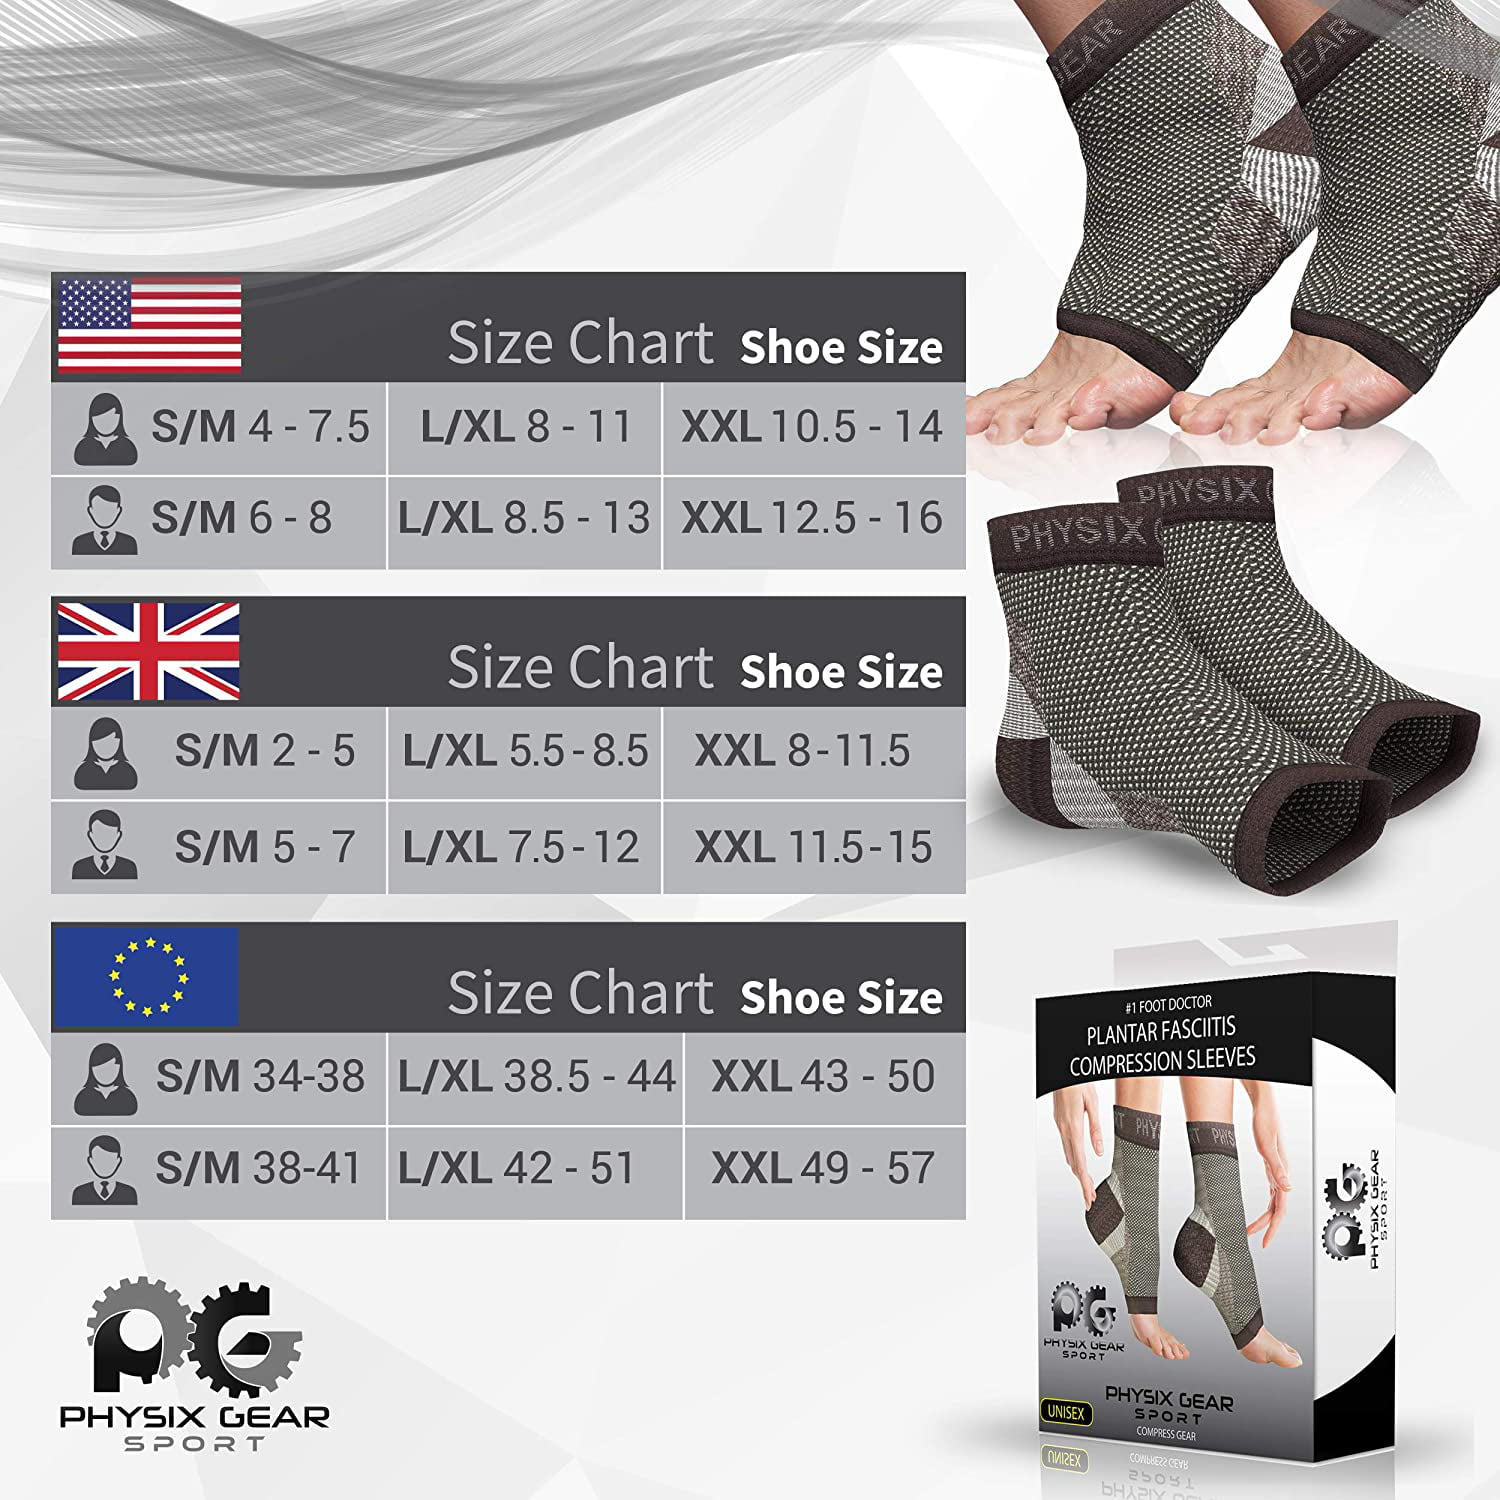 Holds Shape & Better Than a Night Splint Washes Well Best 24/7 Compression Socks Foot Sleeve for Aching Feet & Heel Pain Relief Plantar Fasciitis Socks with Arch Support for Men & Women 